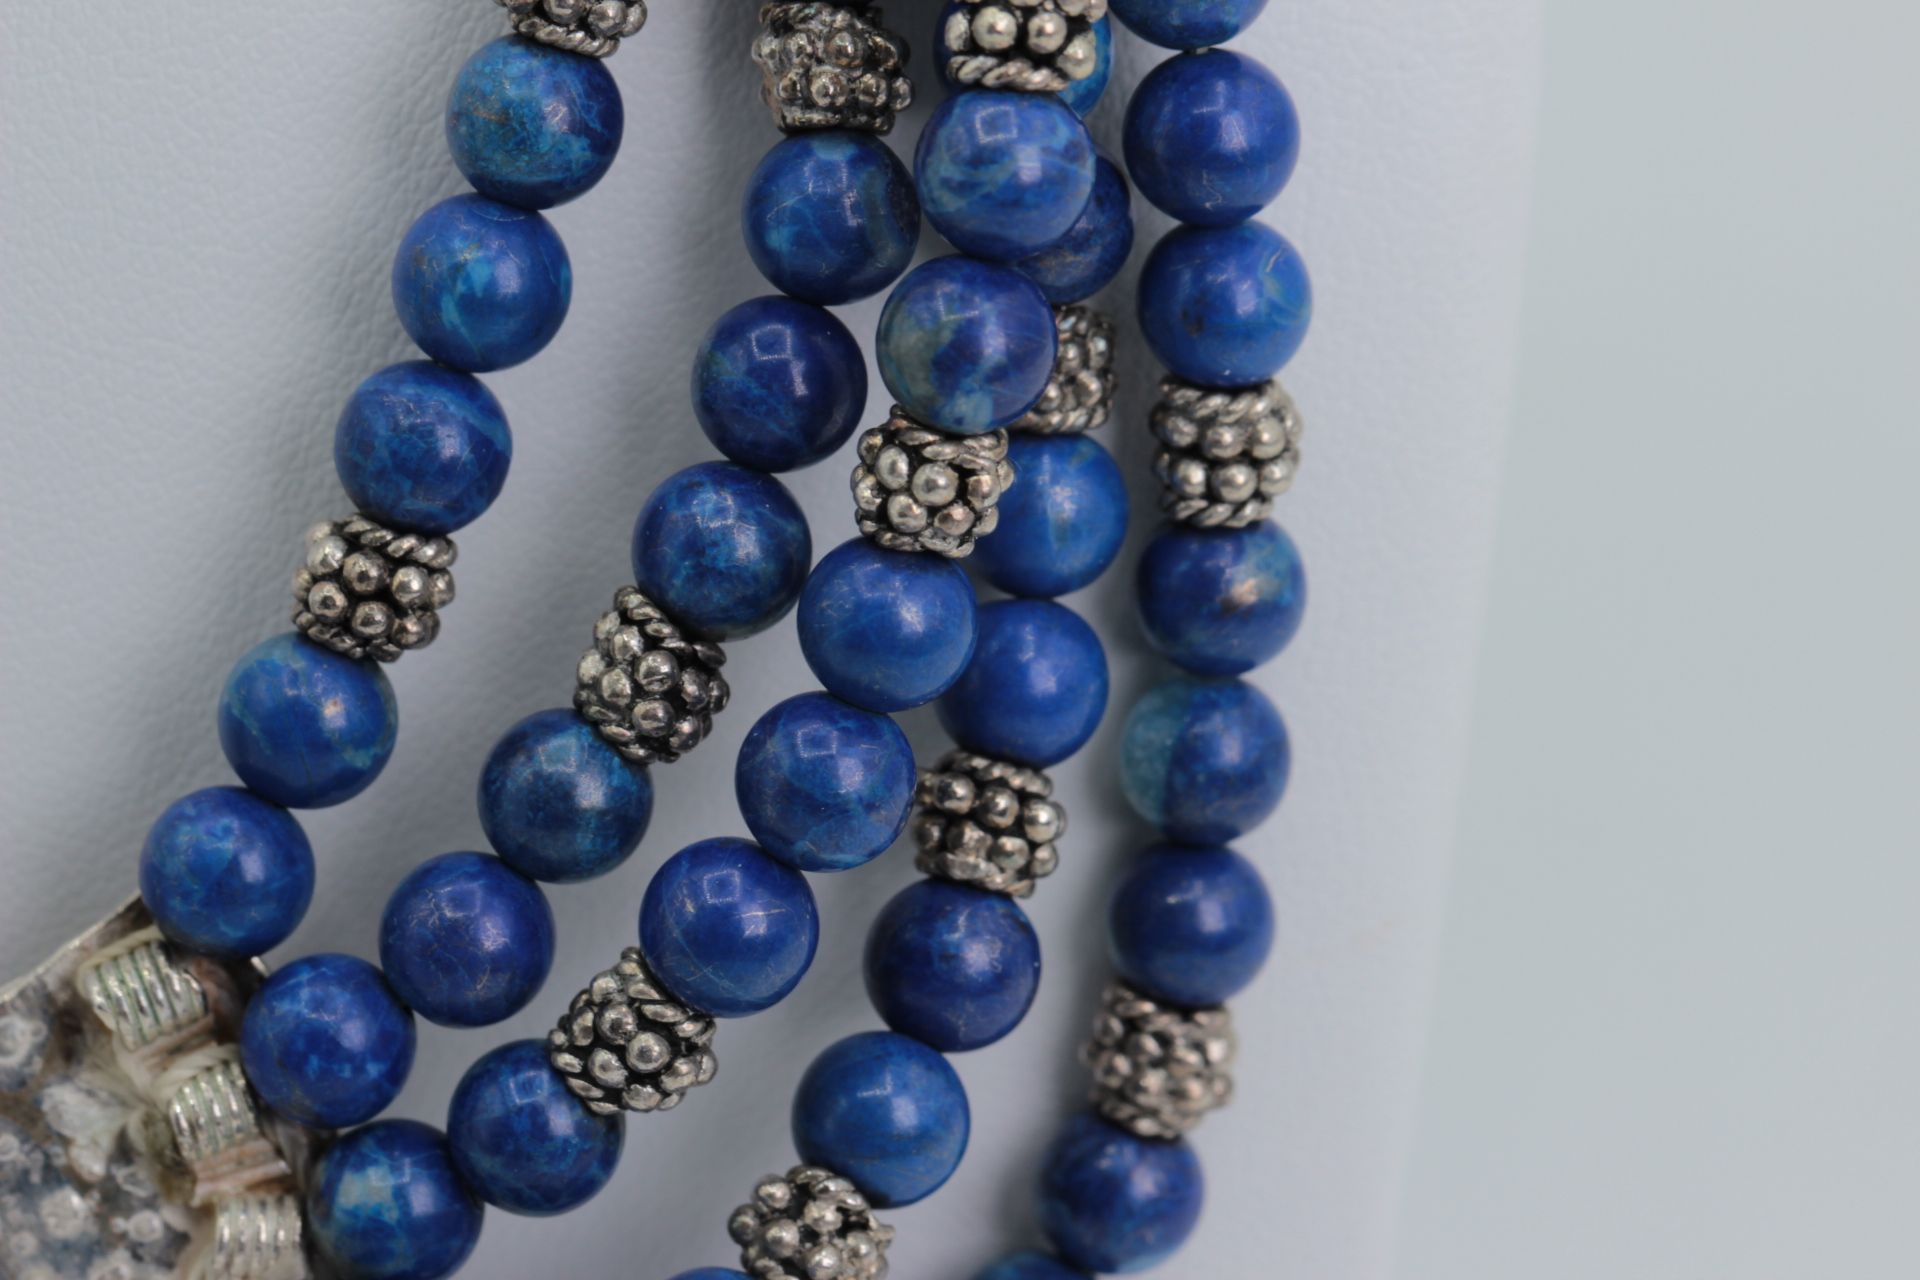 Ottoman Silver necklace with blue beads, centerpiece set with apatite - Image 3 of 7